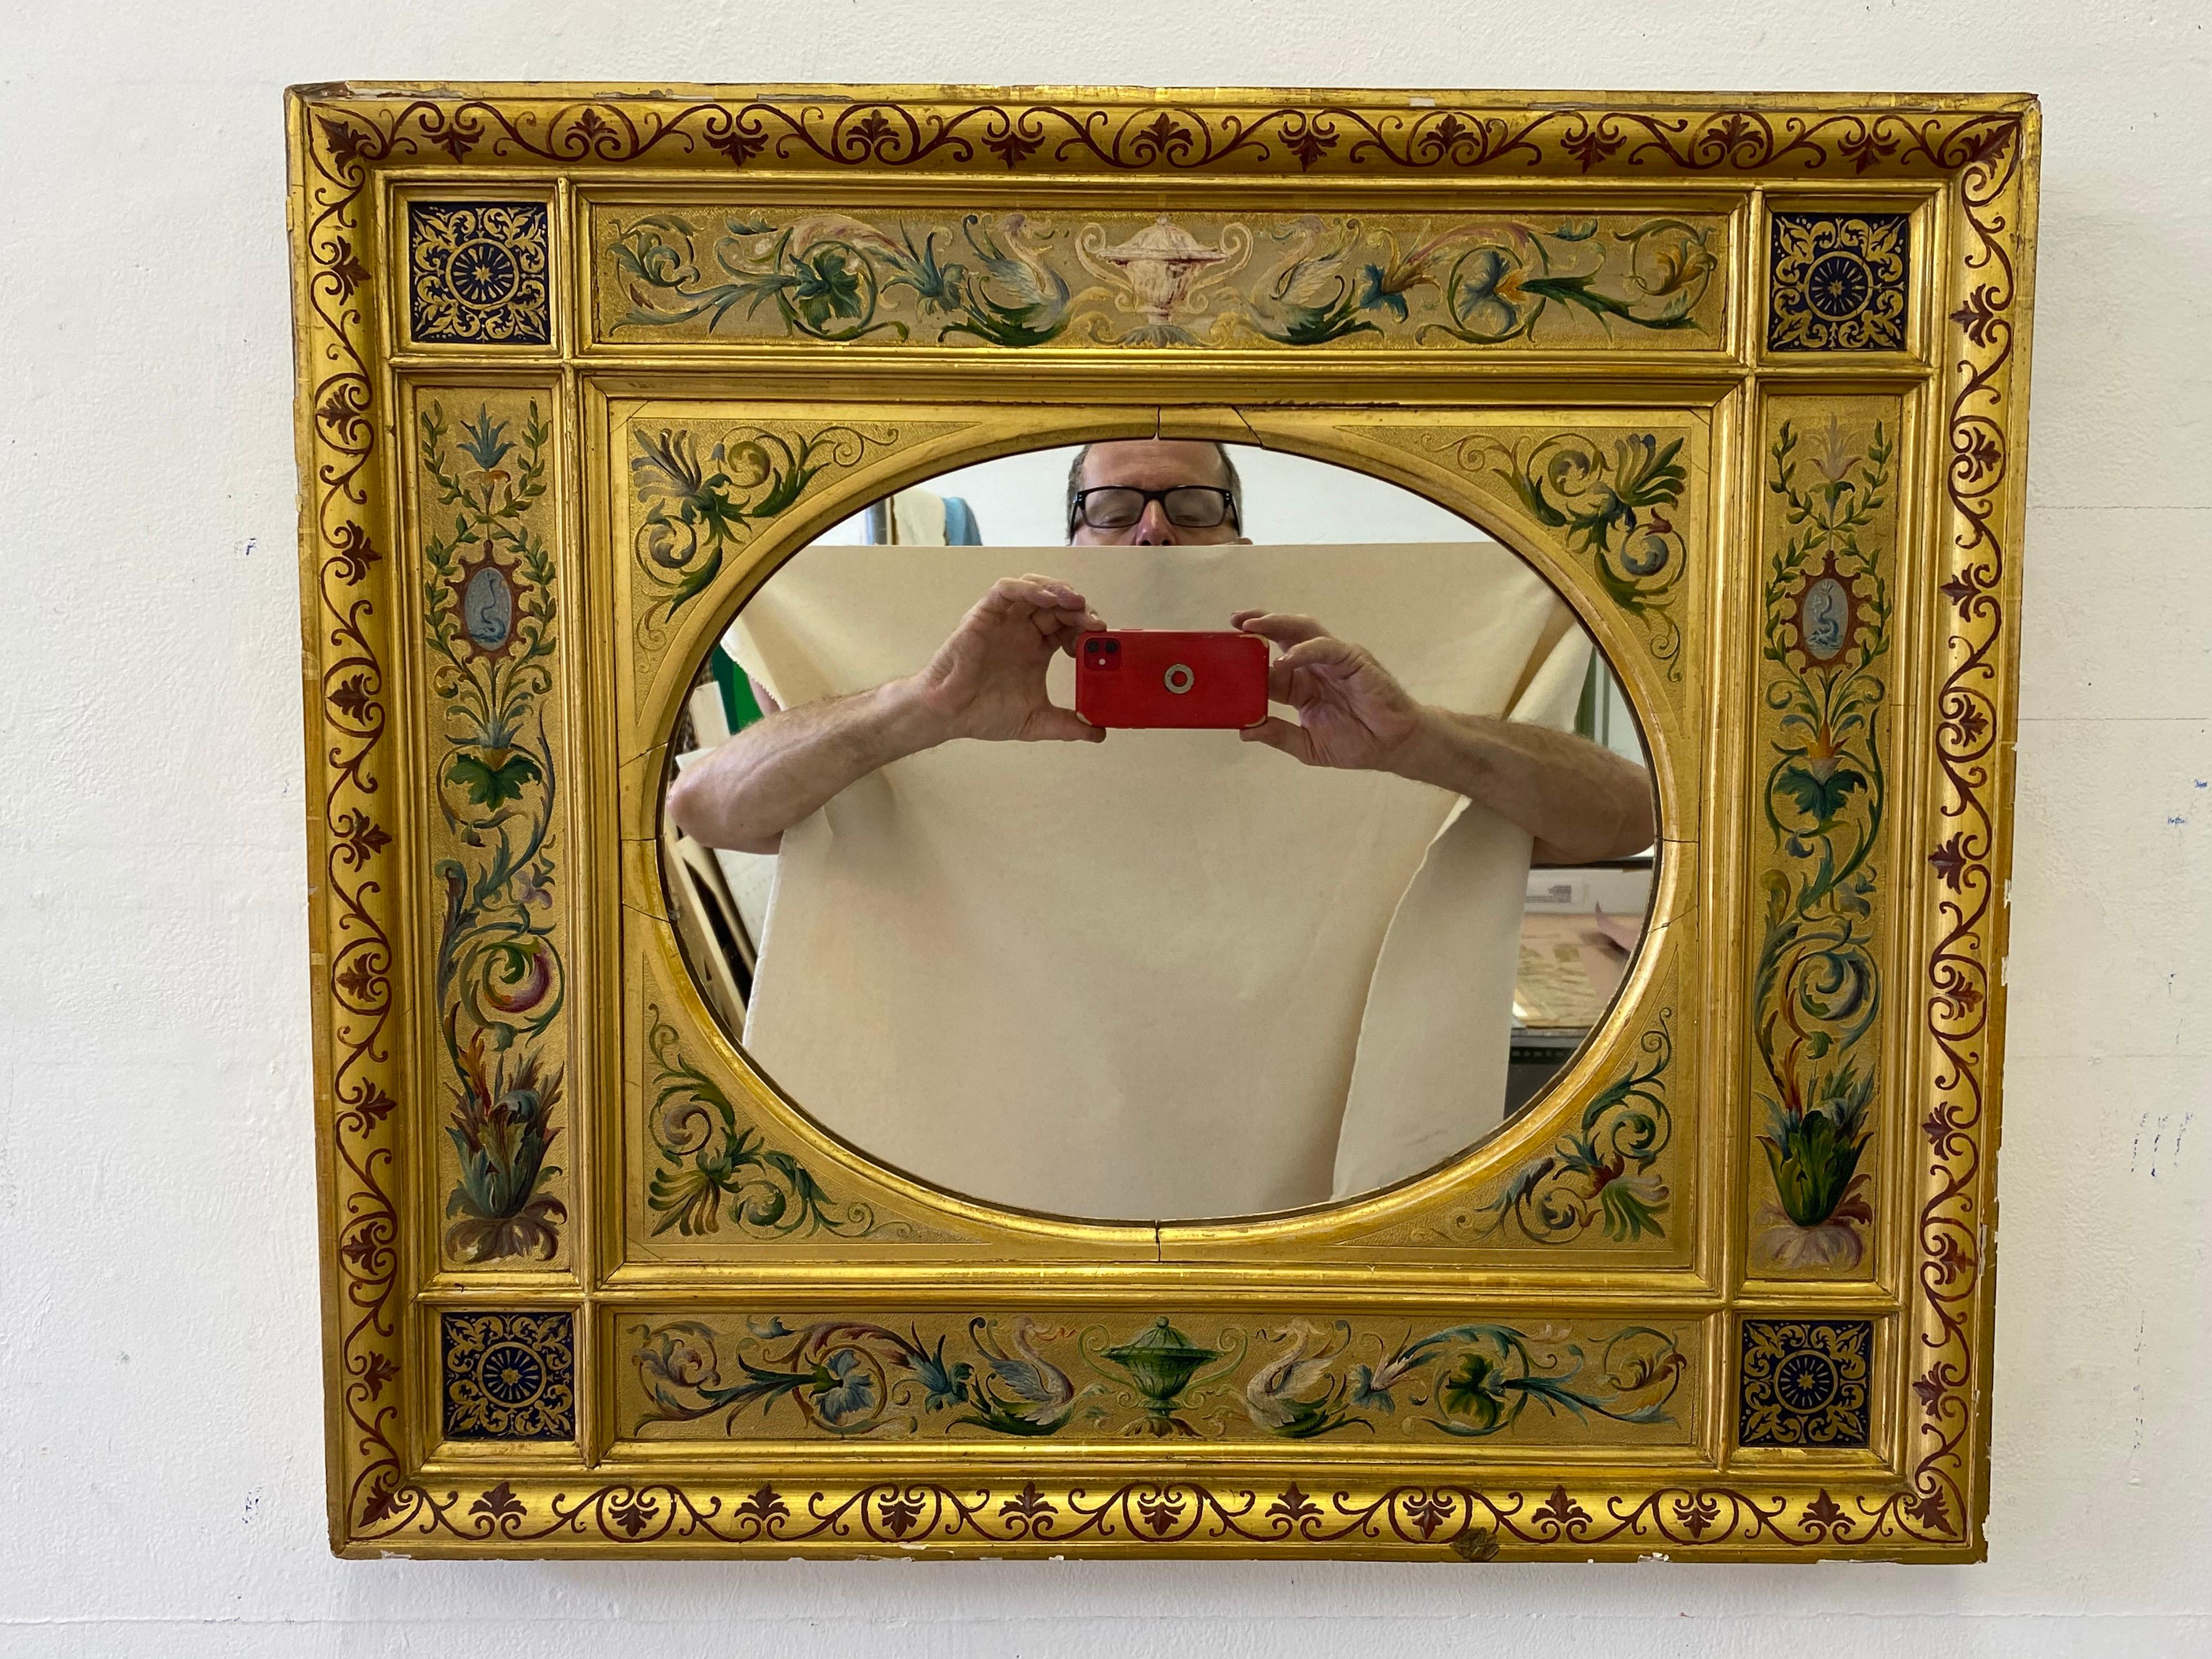 19th century Italian gilt mirror with hand-painted designs over most of the frame. Divided frame design with an oval mirror. Nice quality painting with urns top and bottom.